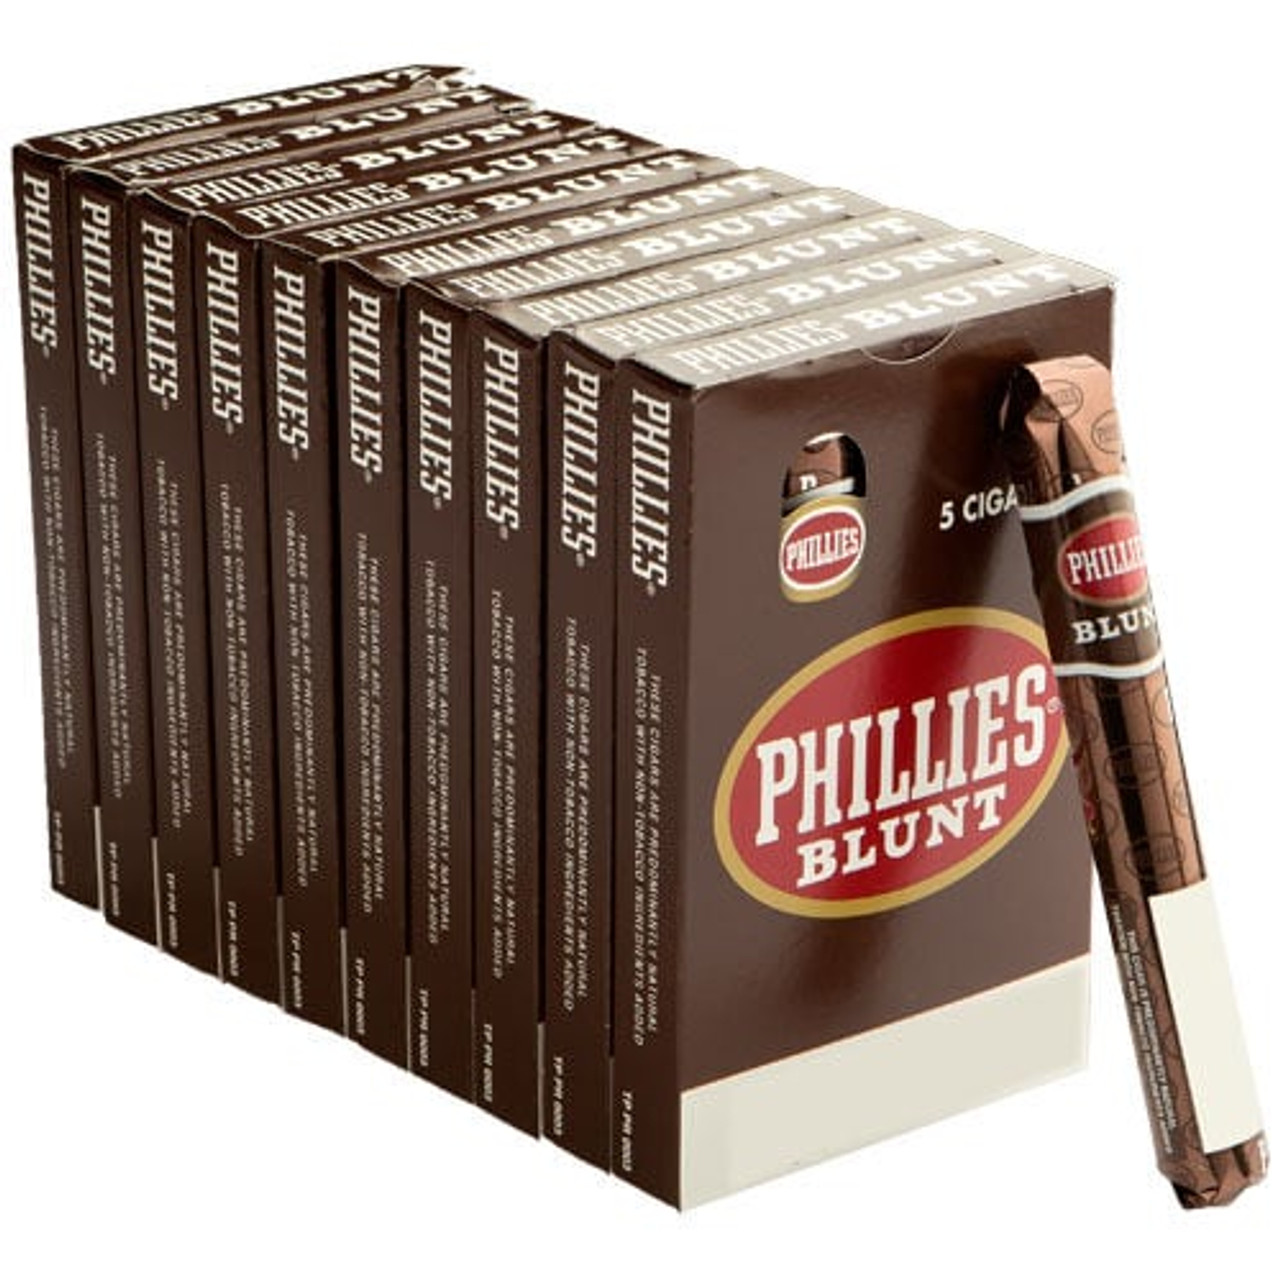 Phillies Blunt Chocolate Cigars (10 Packs of 5) - Natural *Box